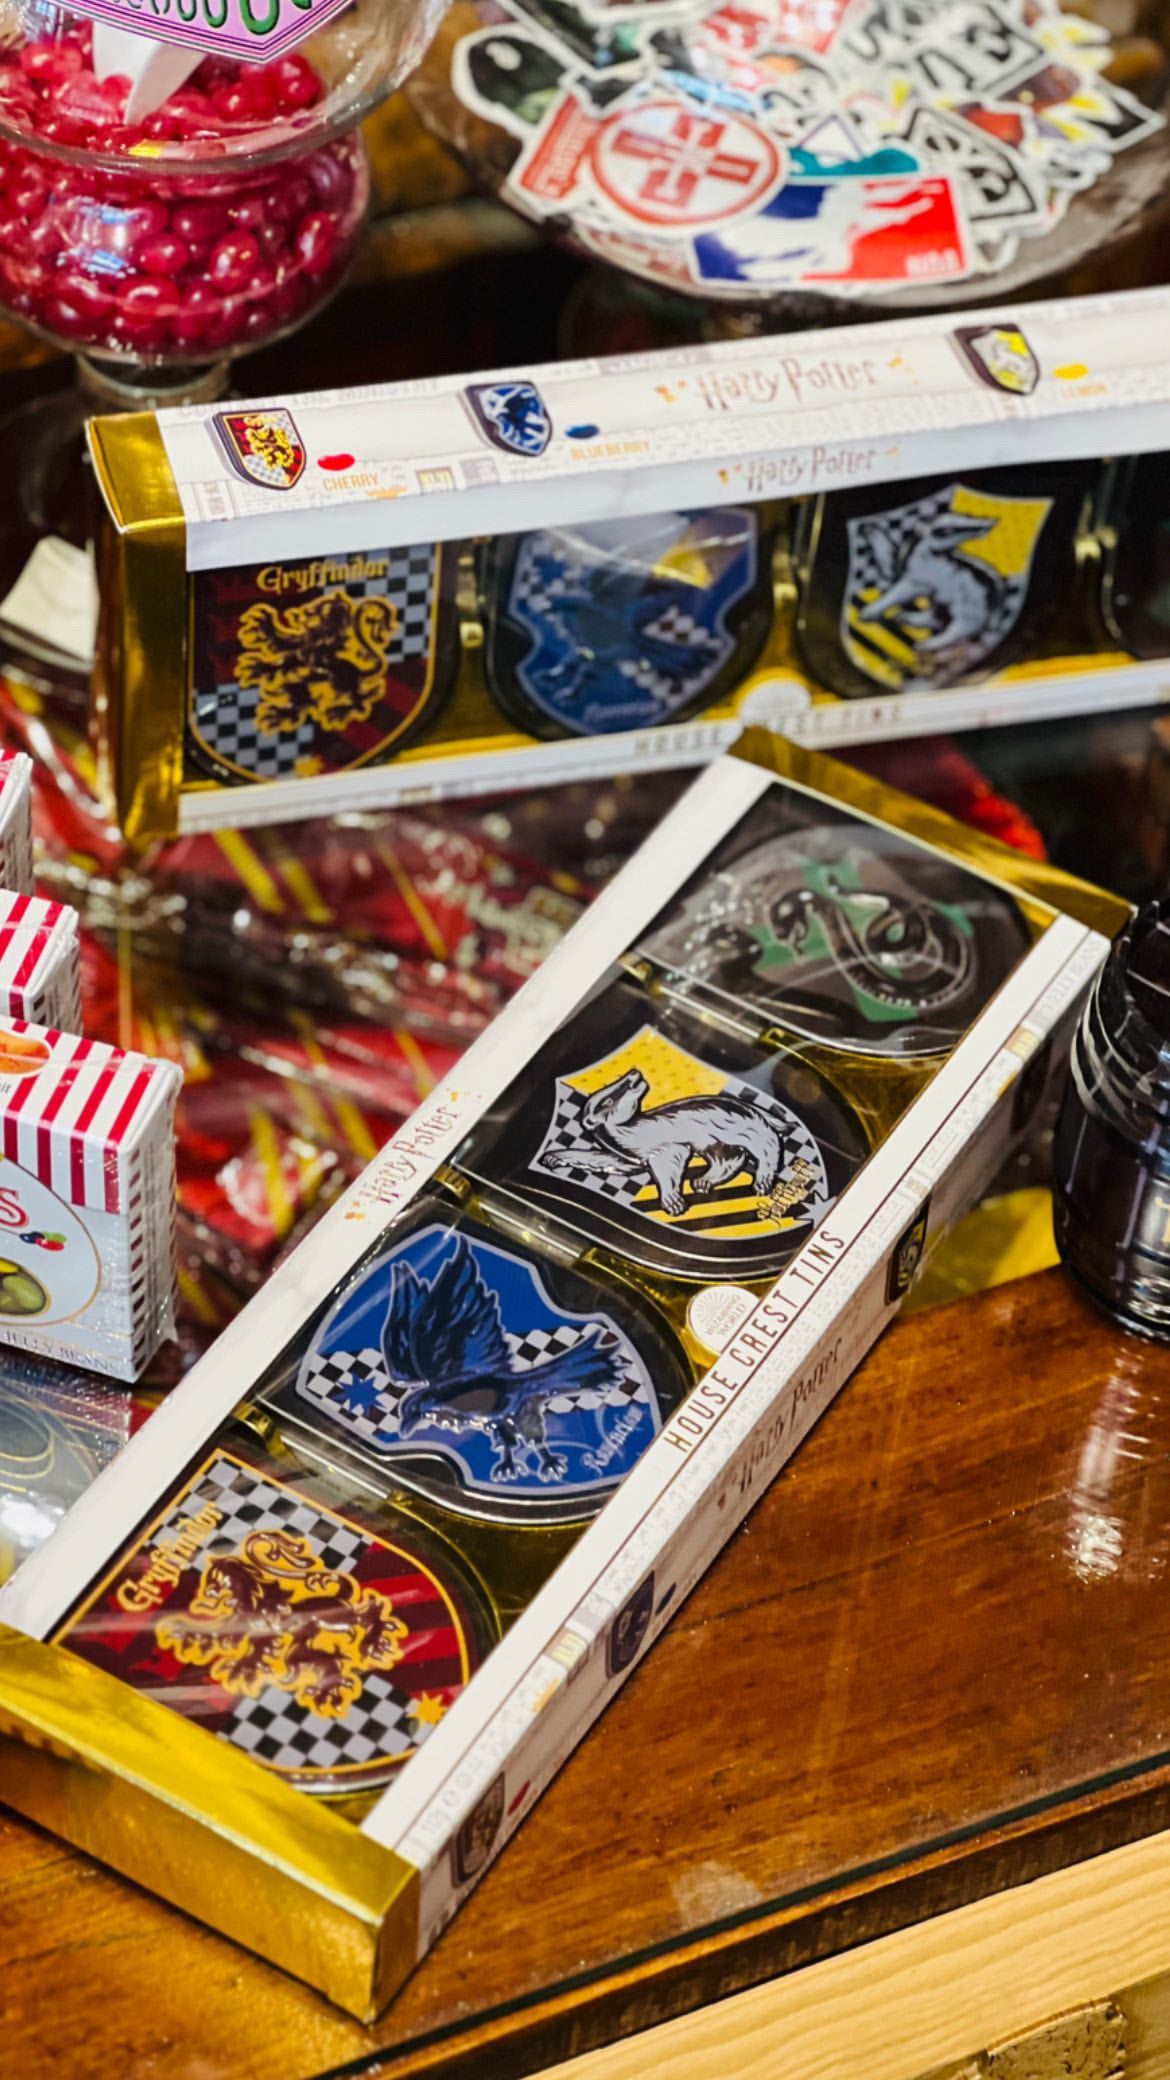 A set of Harry Potter candies in tin cans